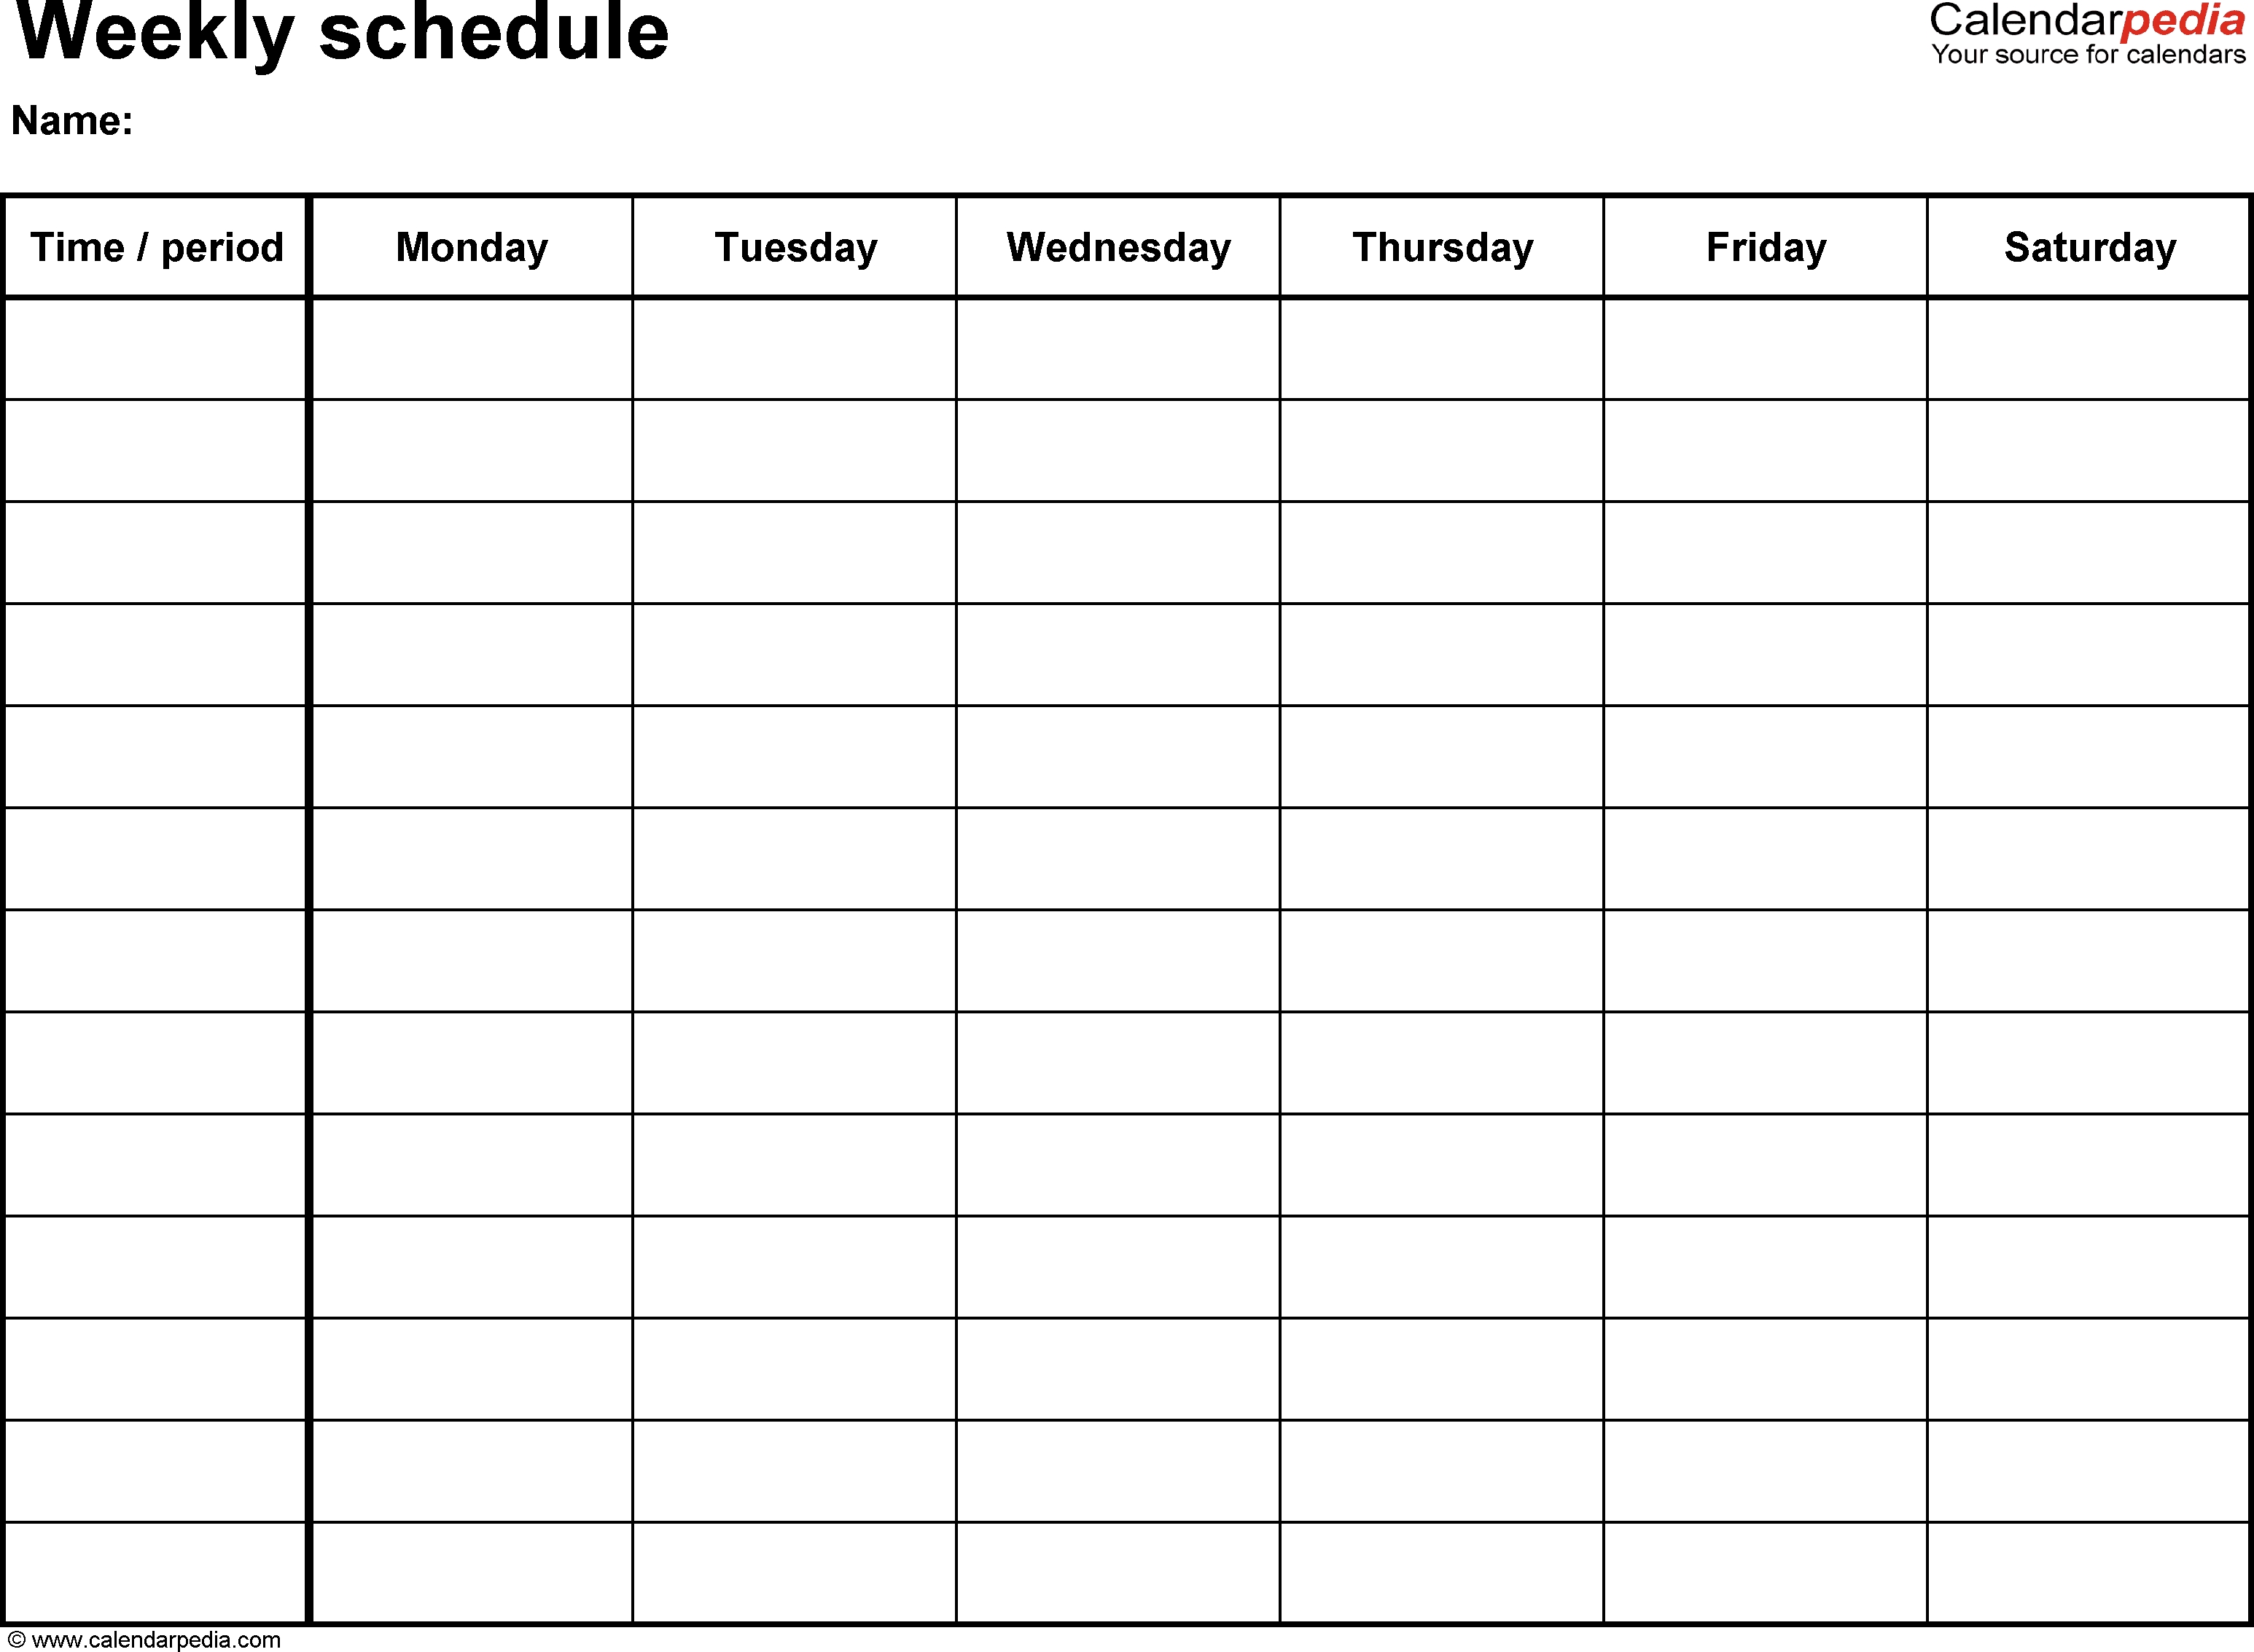 Free Weekly Schedule Templates For Word - 18 Templates with regard to Monthly Calendar Templates Monday To Friday